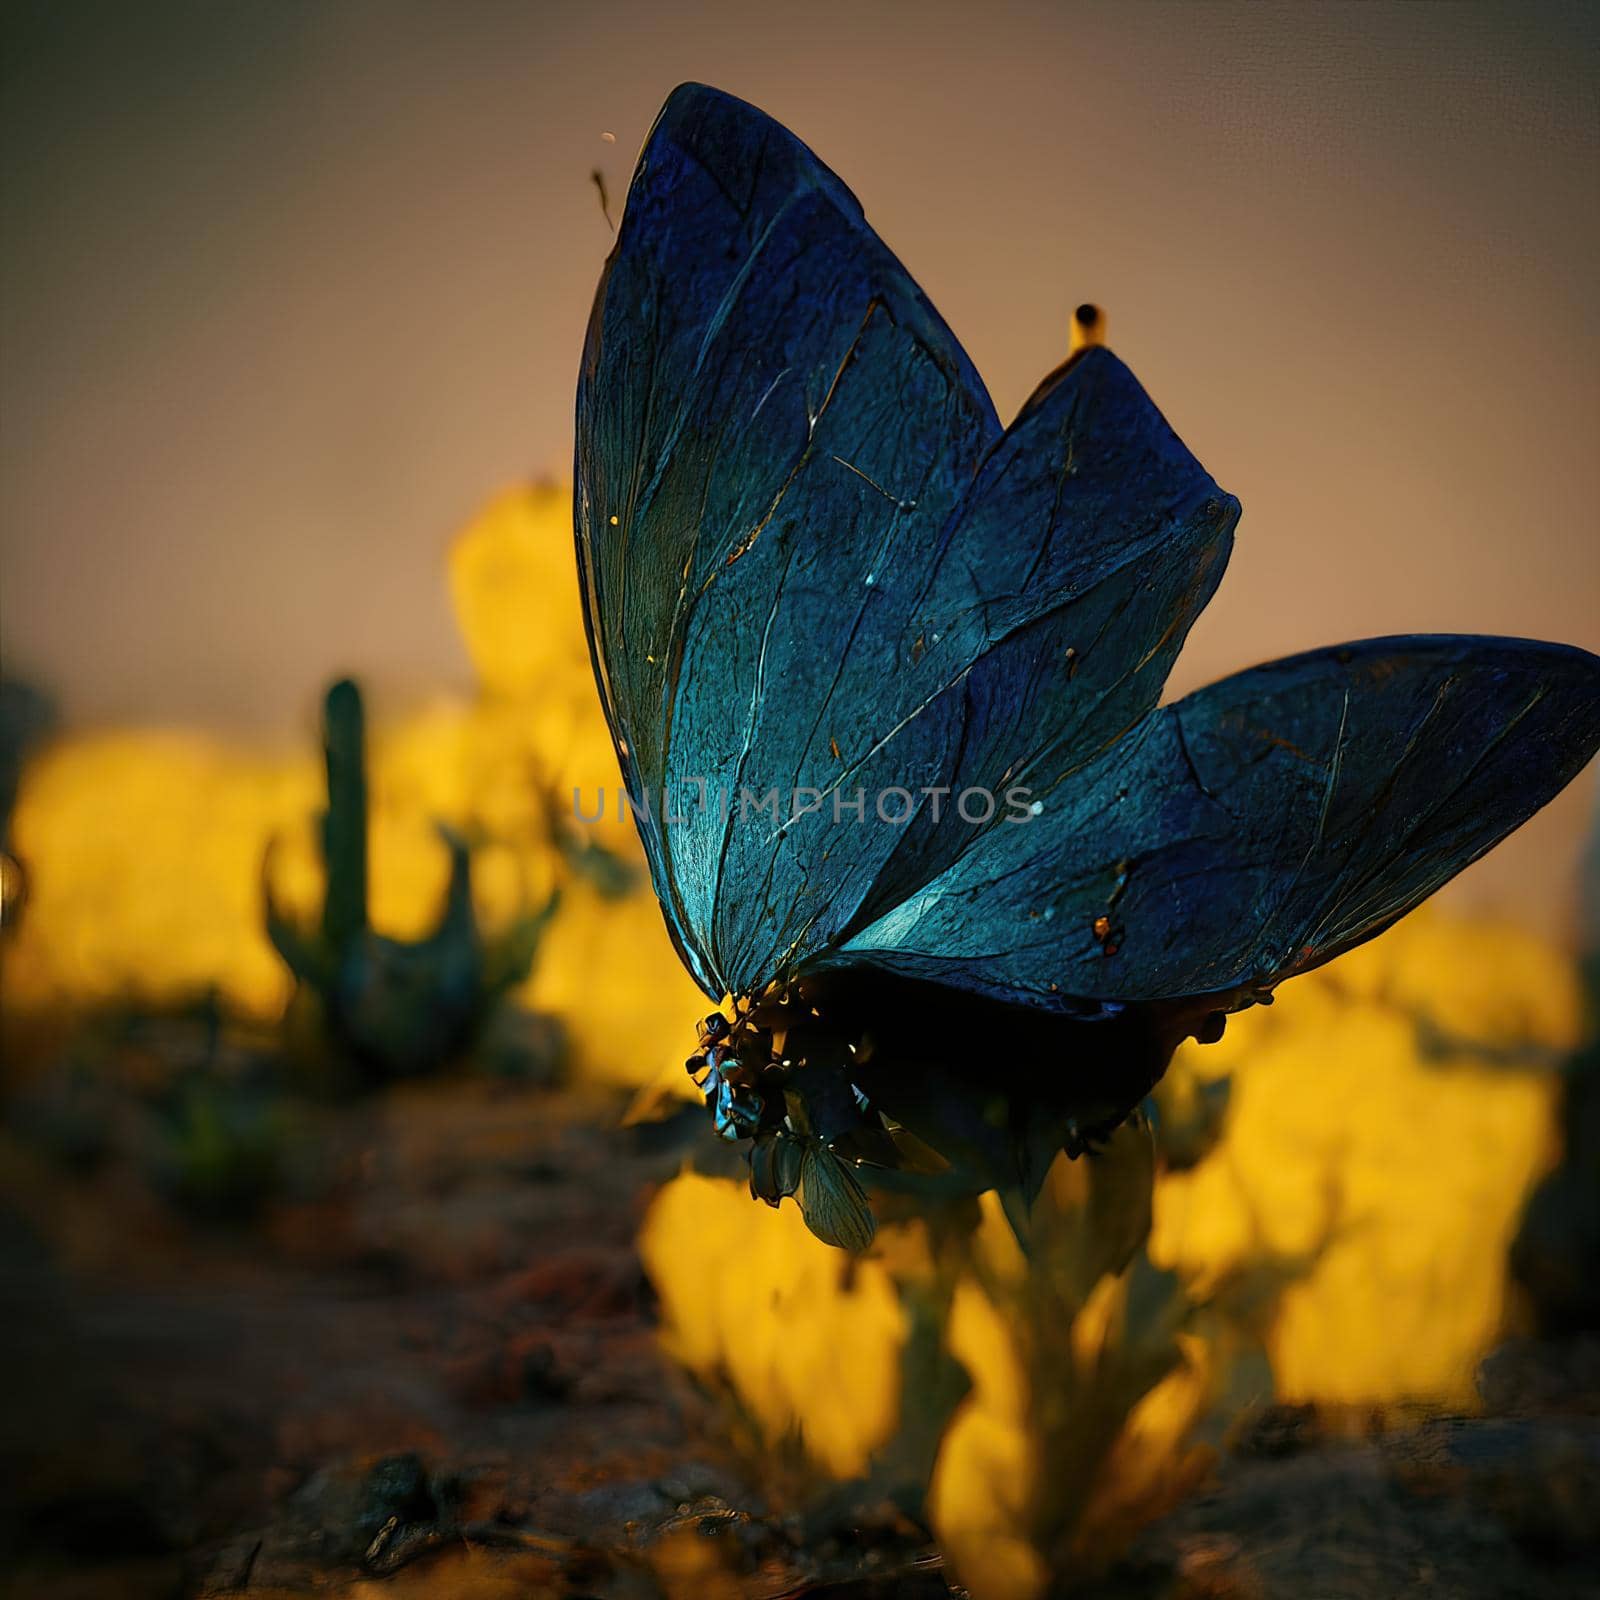 Digital art of butterfly sitting on flower. High quality photo